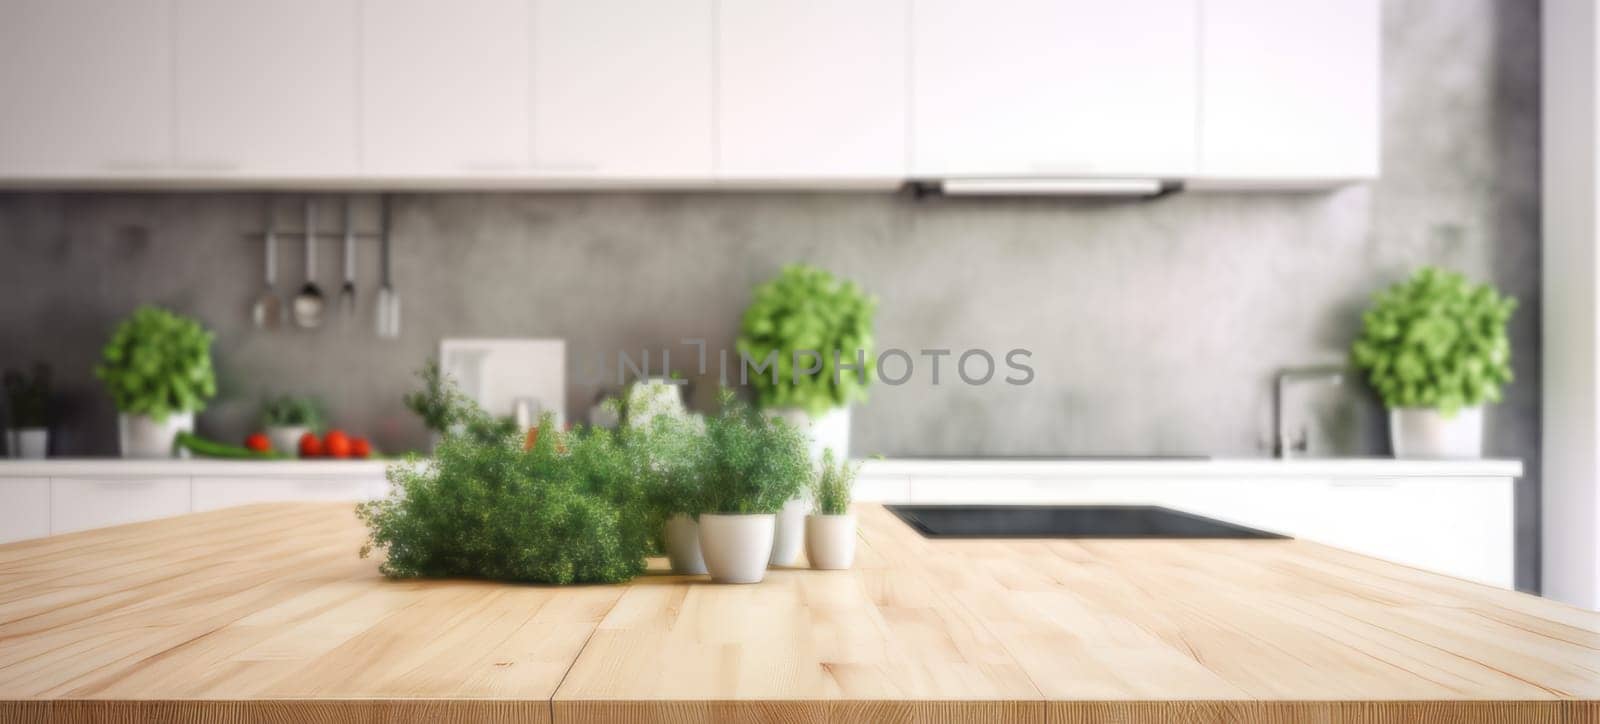 Blurred interior of a white kitchen with a wooden countertop with a green plants.